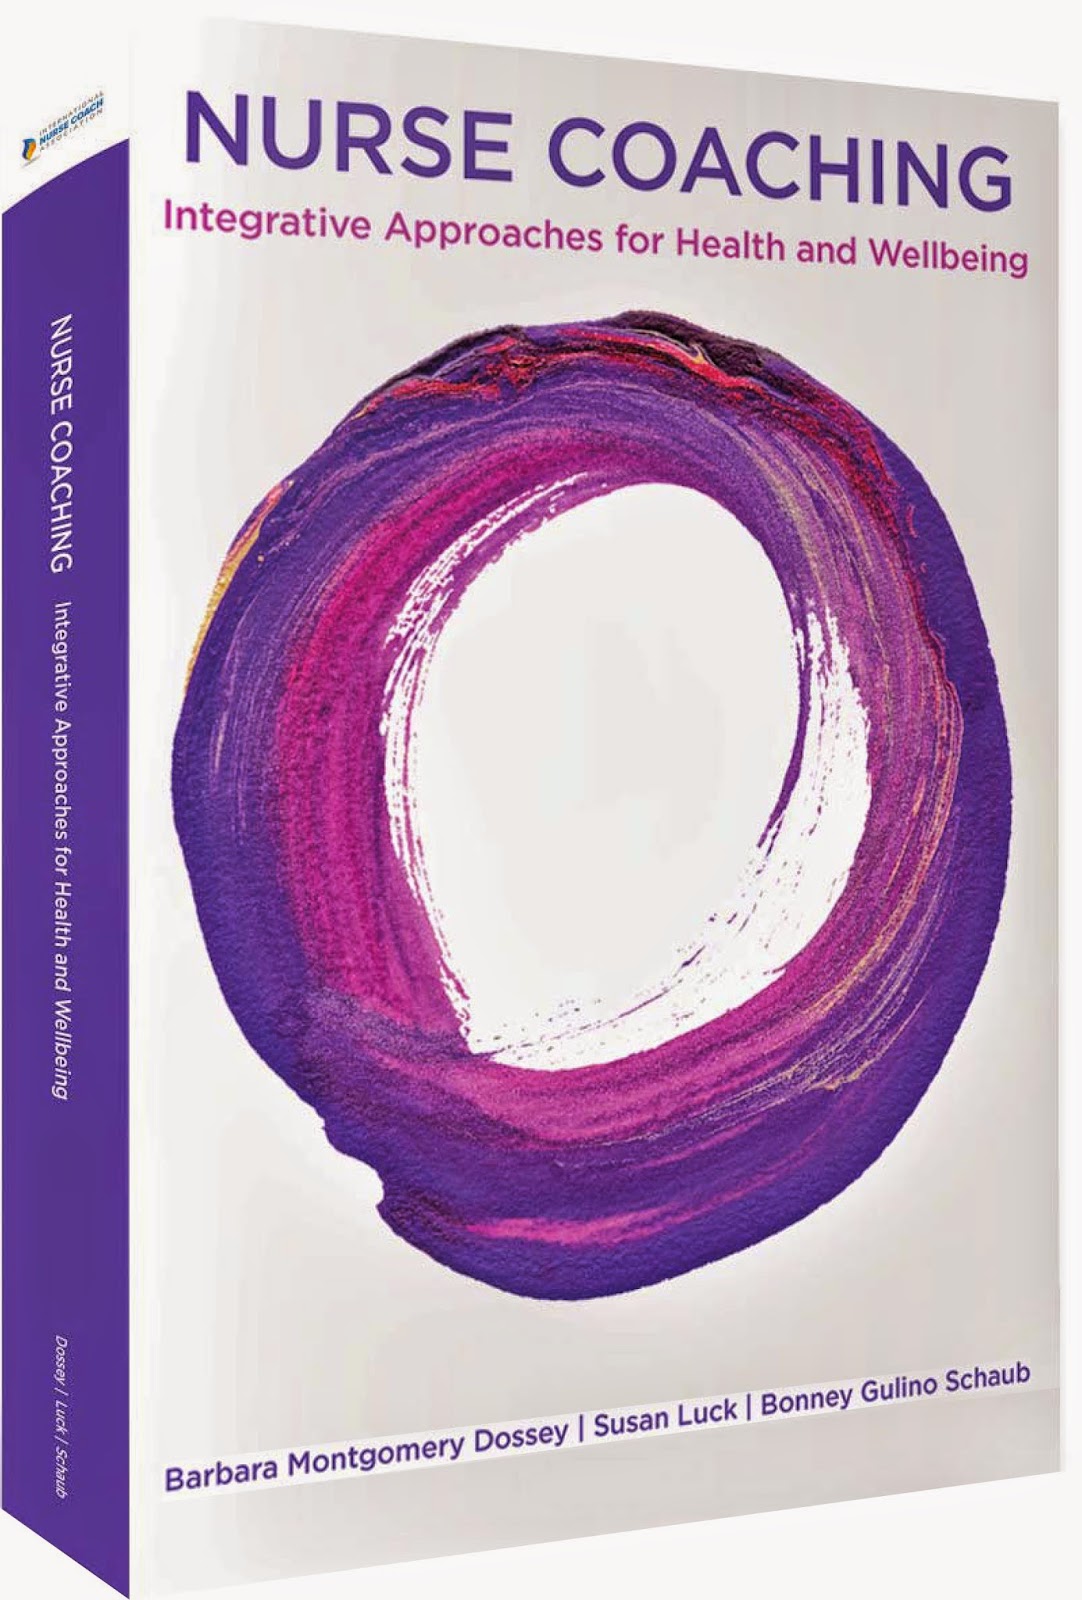 http://www.amazon.com/Nurse-Coaching-Integrative-Approaches-Wellbeing/dp/0615943292/ref=sr_1_1?s=books&ie=UTF8&qid=1414956369&sr=1-1&keywords=nurse+coaching%3A+integrative+approaches+for+health+and+wellbeing